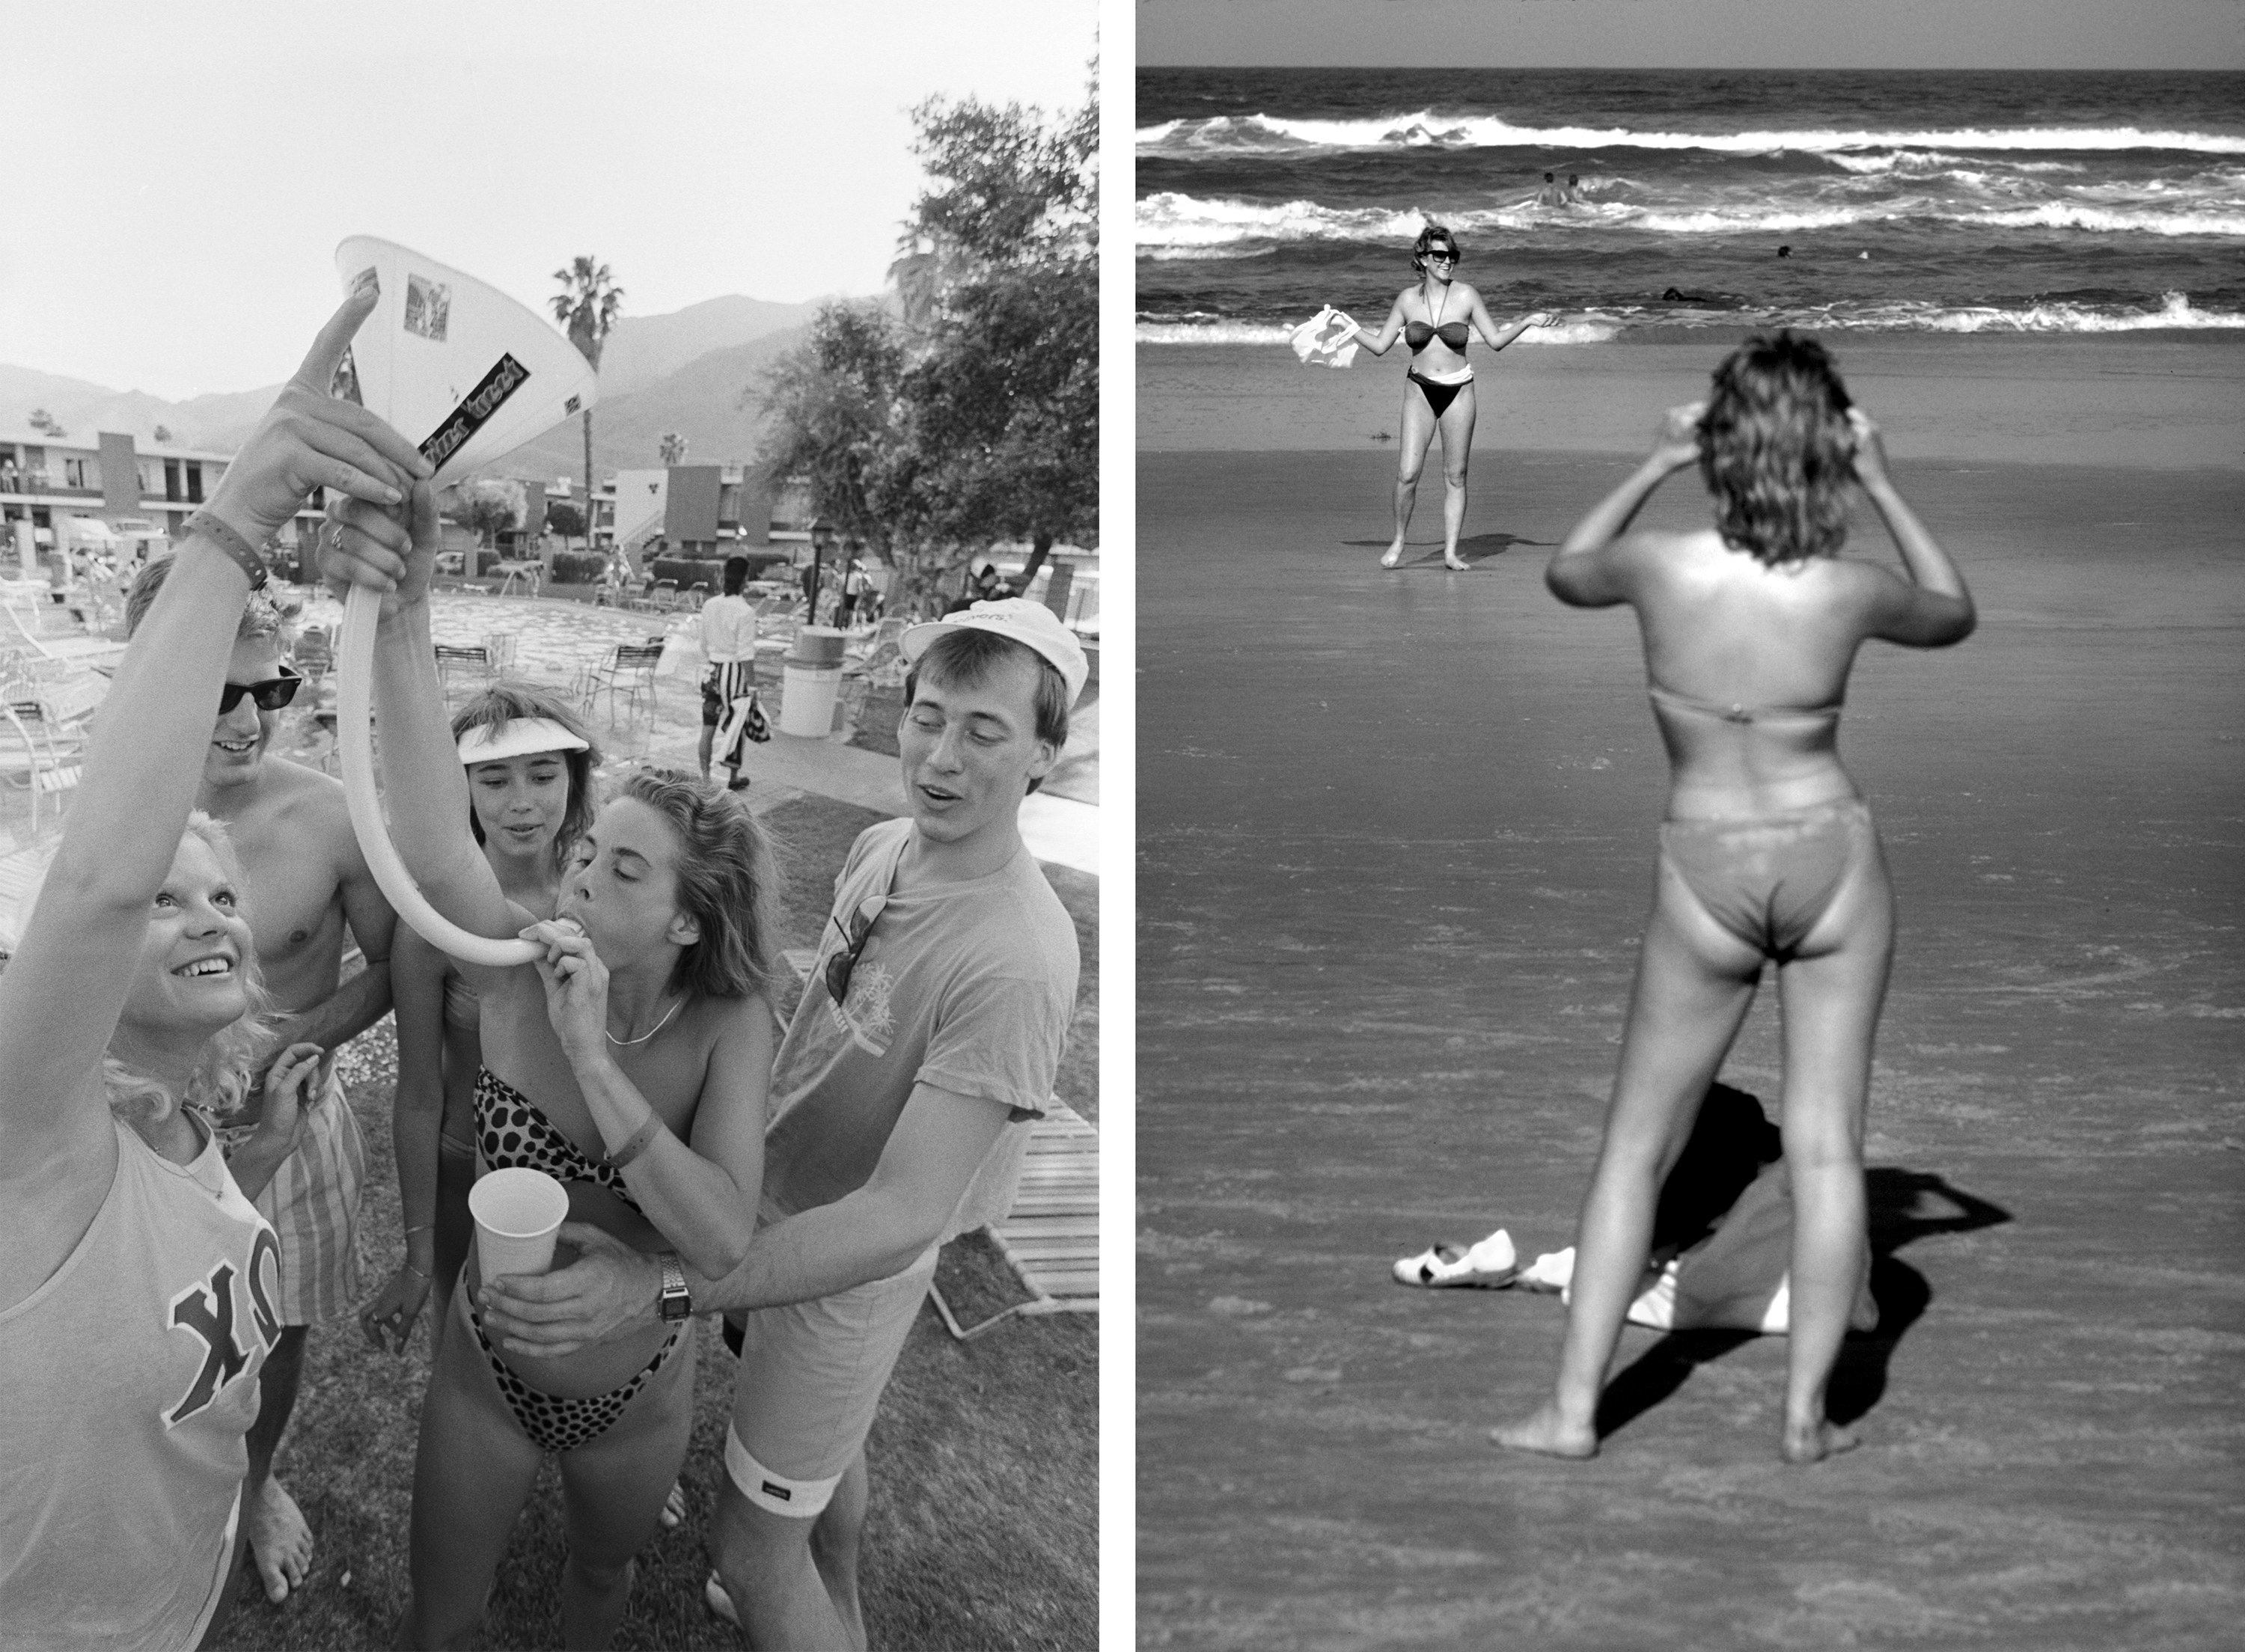 left, a woman with a beer bong surrounded by friends outside, right, one woman takes a picture of another on a beach 